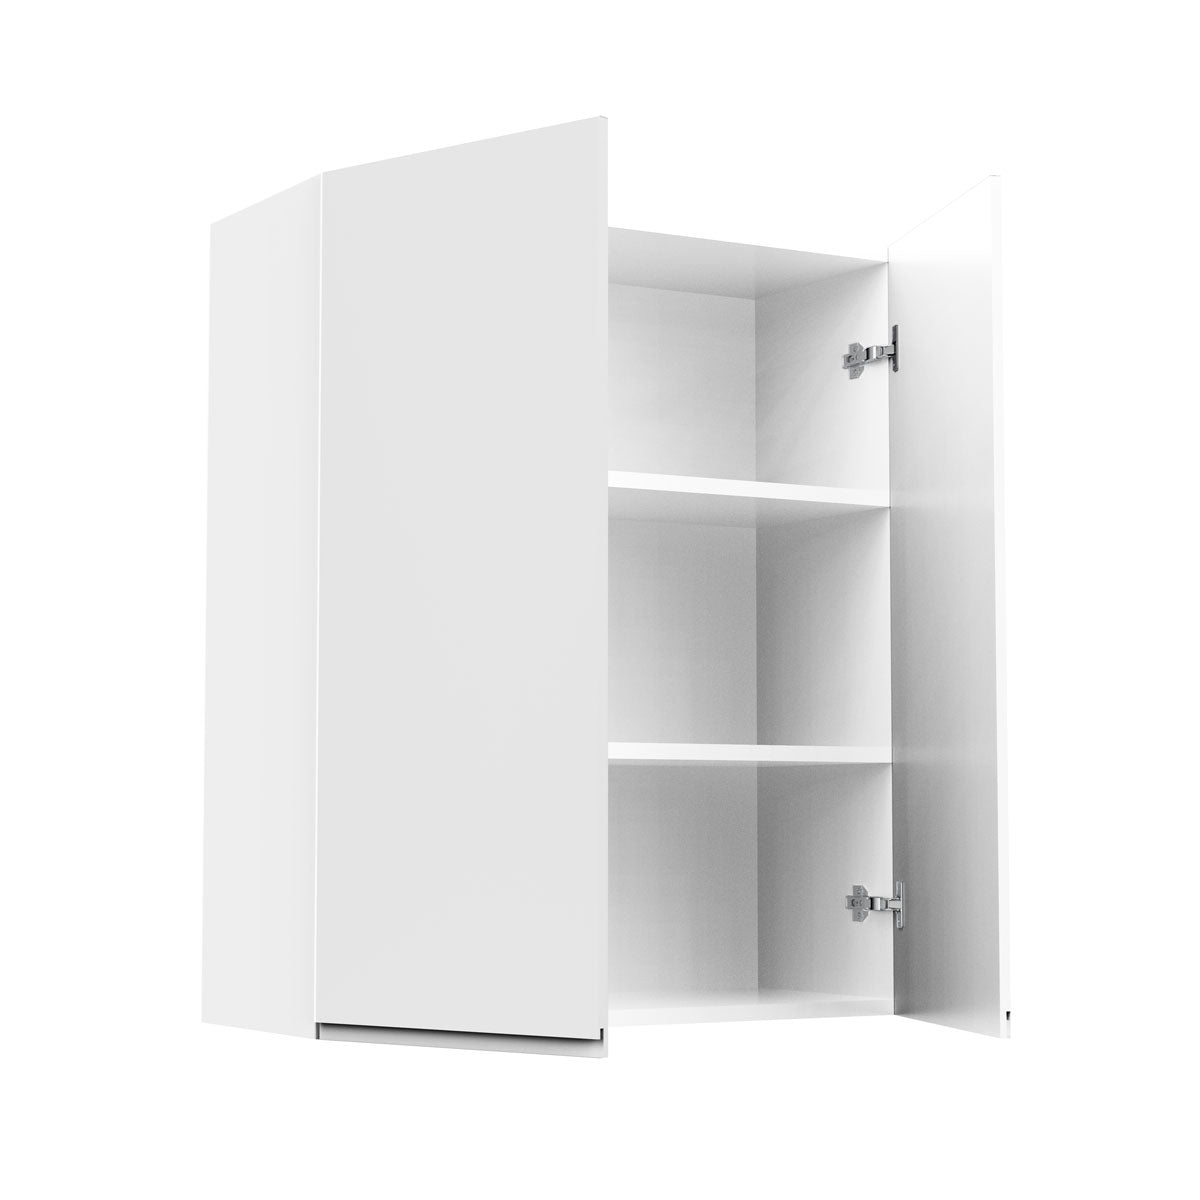 Kitchen Wall Cabinet - RTA - Lacquer white - Double Door Wall Cabinet | 24"W x 36"H x 12"D